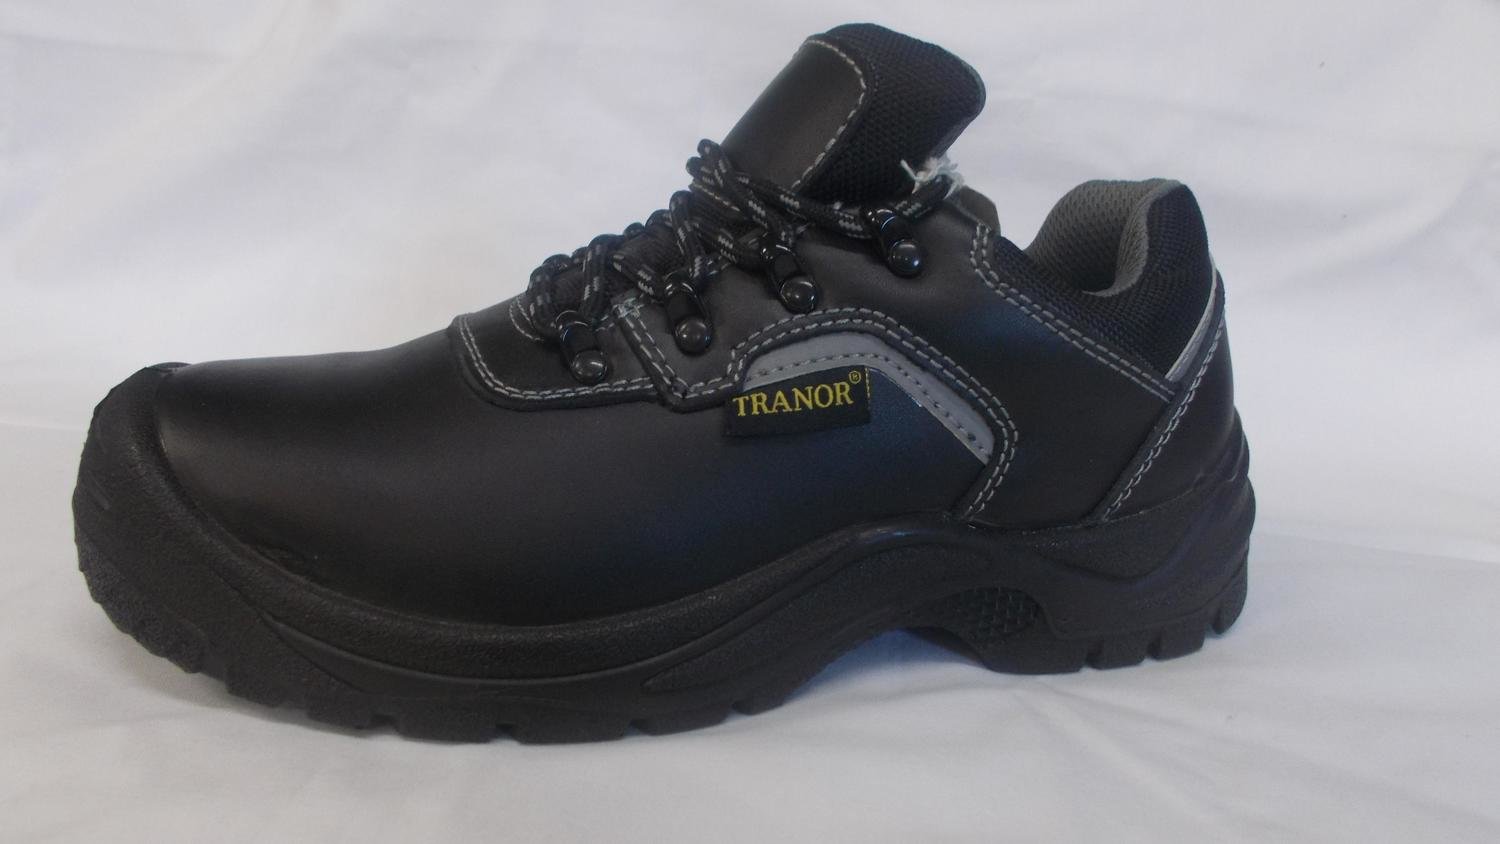 New Tranor Travail Safety Steel Toe Work Shoe